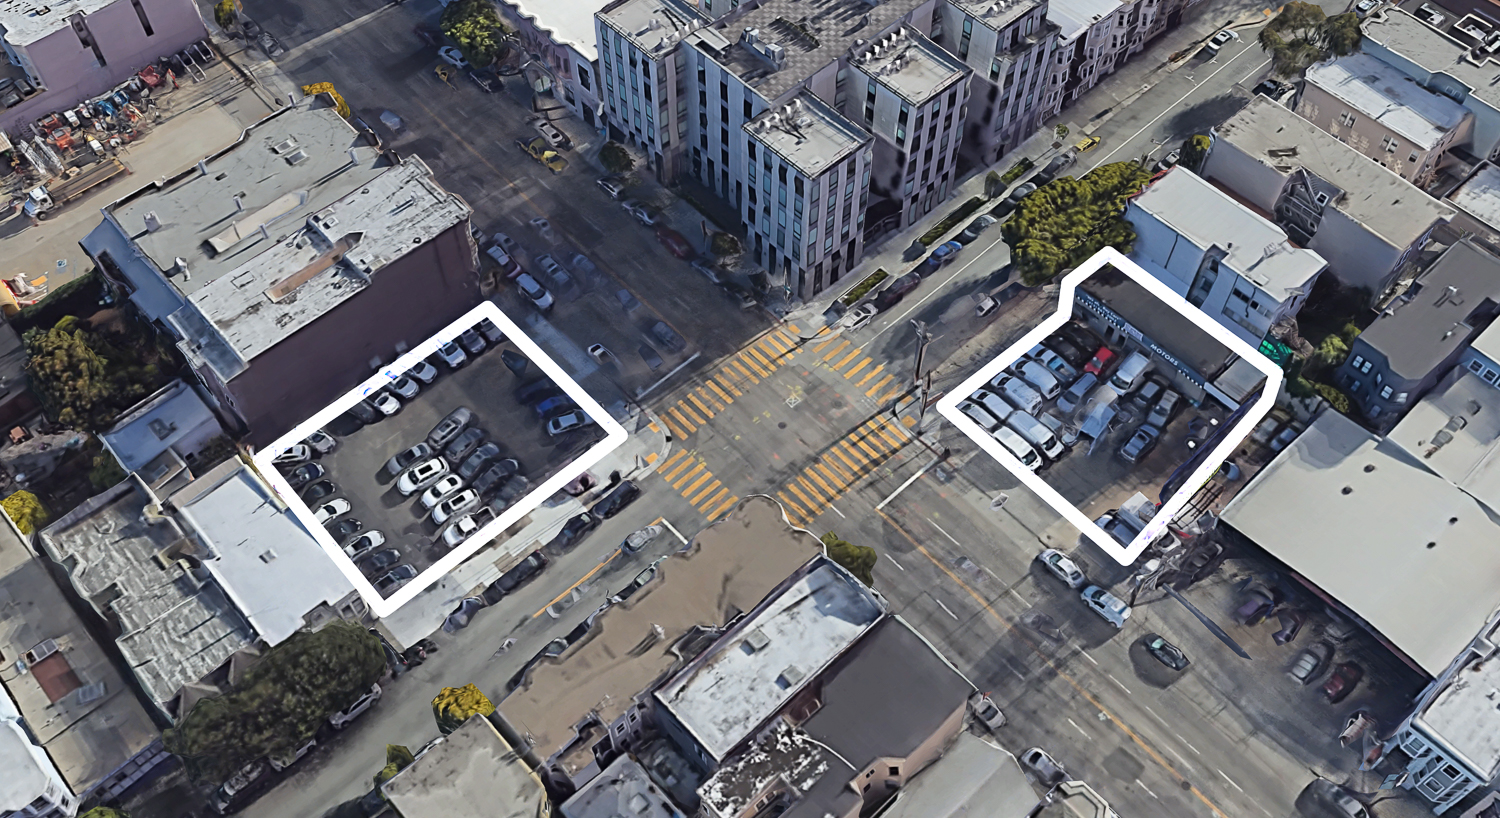 401 South Van Ness Avenue. (left) and 1500 15th Street (right), aerial view looking southwest, image via Google Street View